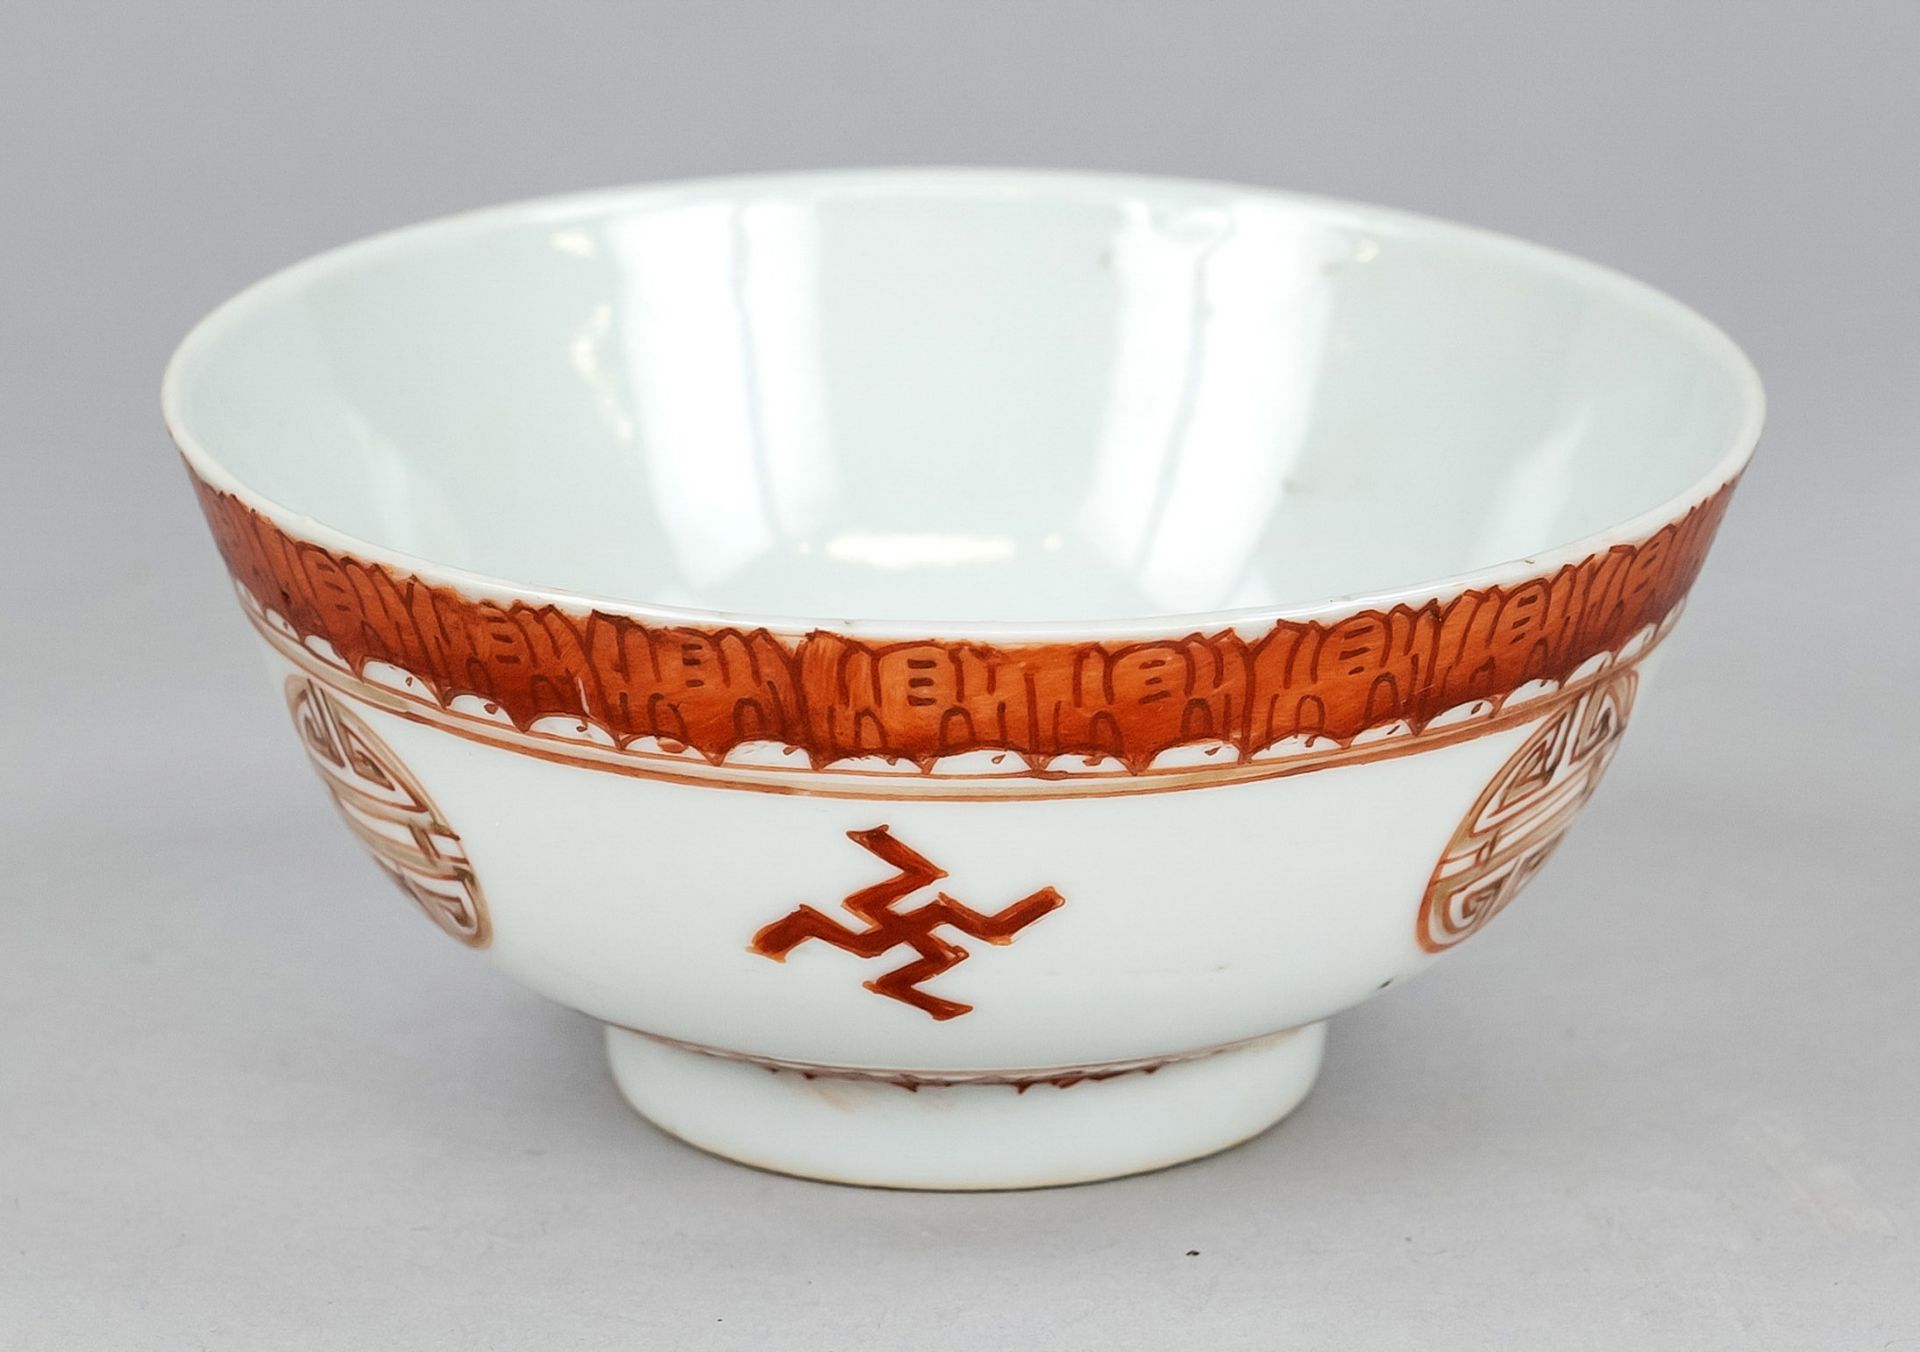 Congratulatory bowl, China, Qing dynasty(1644-1912), 1st half 19th century, porcelain bowl with